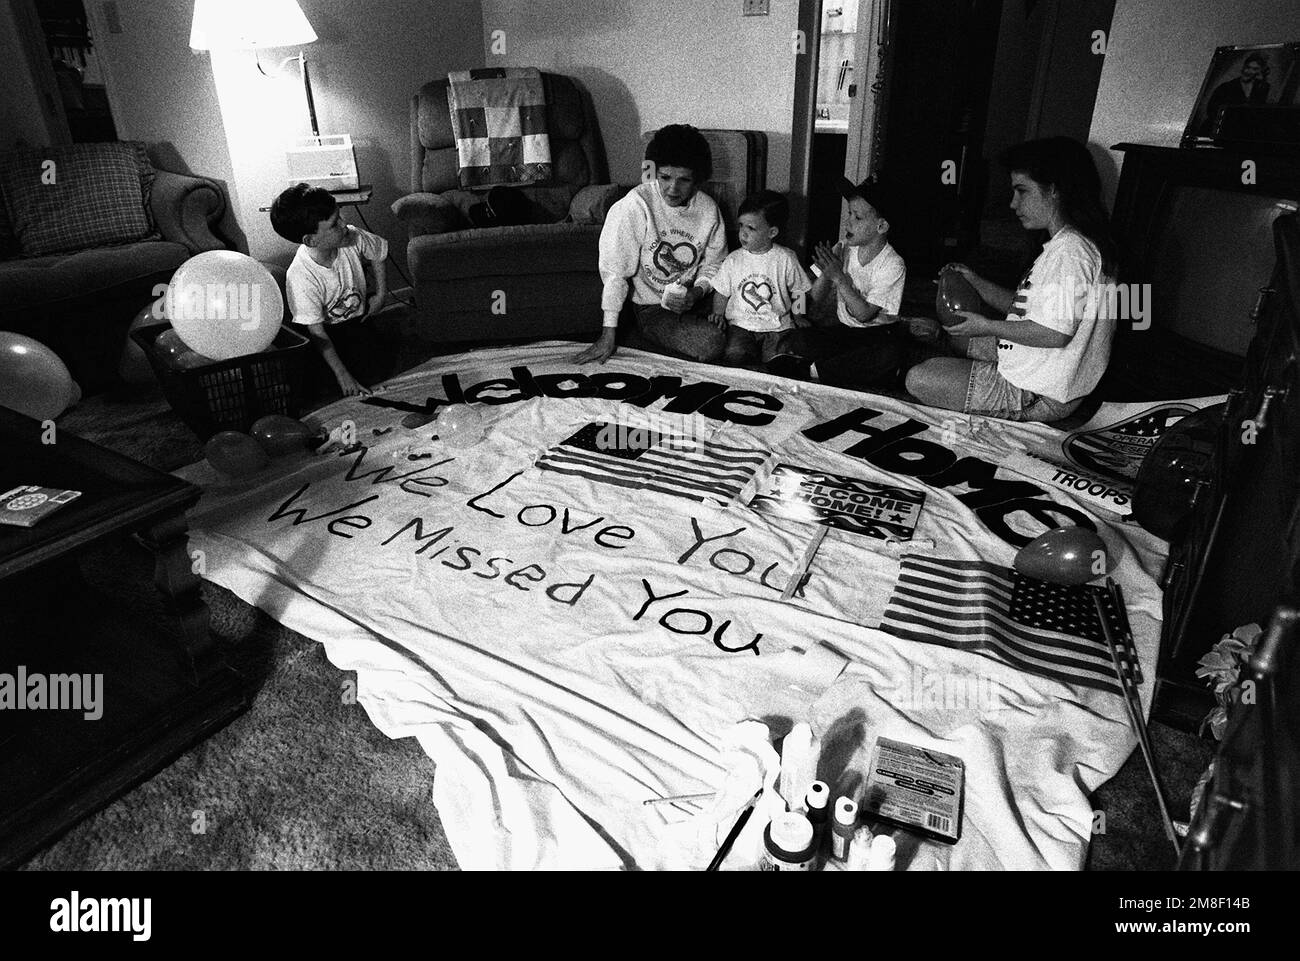 The ombudsman for the battleship USS WISCONSIN (BB-64) and her children prepare a welcome-home banner for the crew of the vessel. The WISCONSIN is scheduled to return to Naval Station, Norfolk, on March 28th following deployment in the Persian Gulf area during Operation Desert Storm. Subject Operation/Series: DESERT STORM Country: Unknown Stock Photo